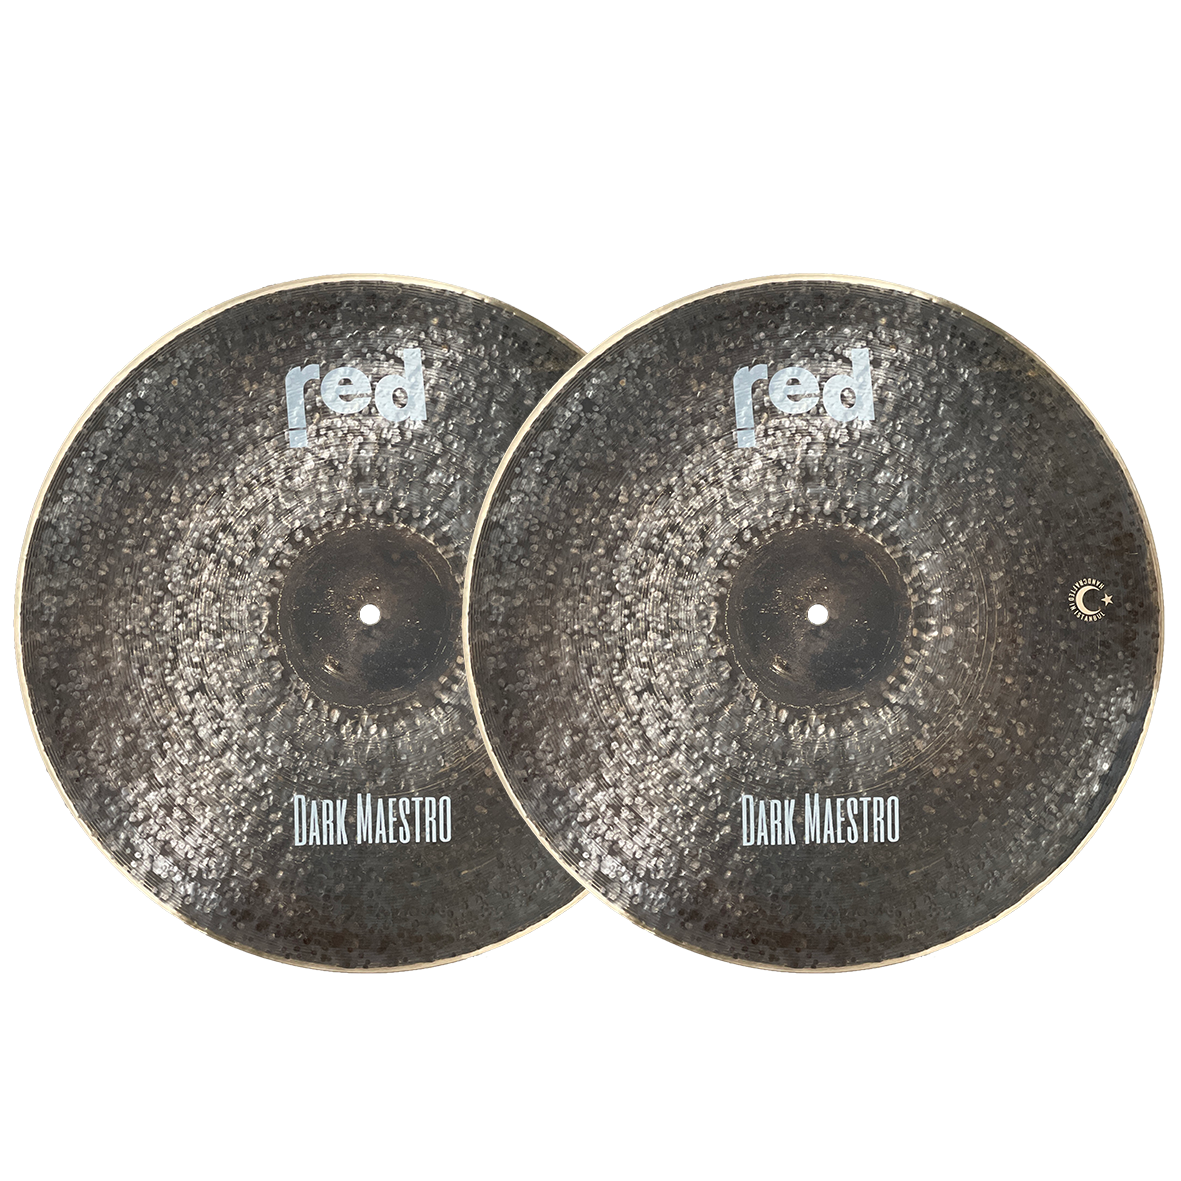 Red Cymbals Maestro Series Hi-hat cymbals